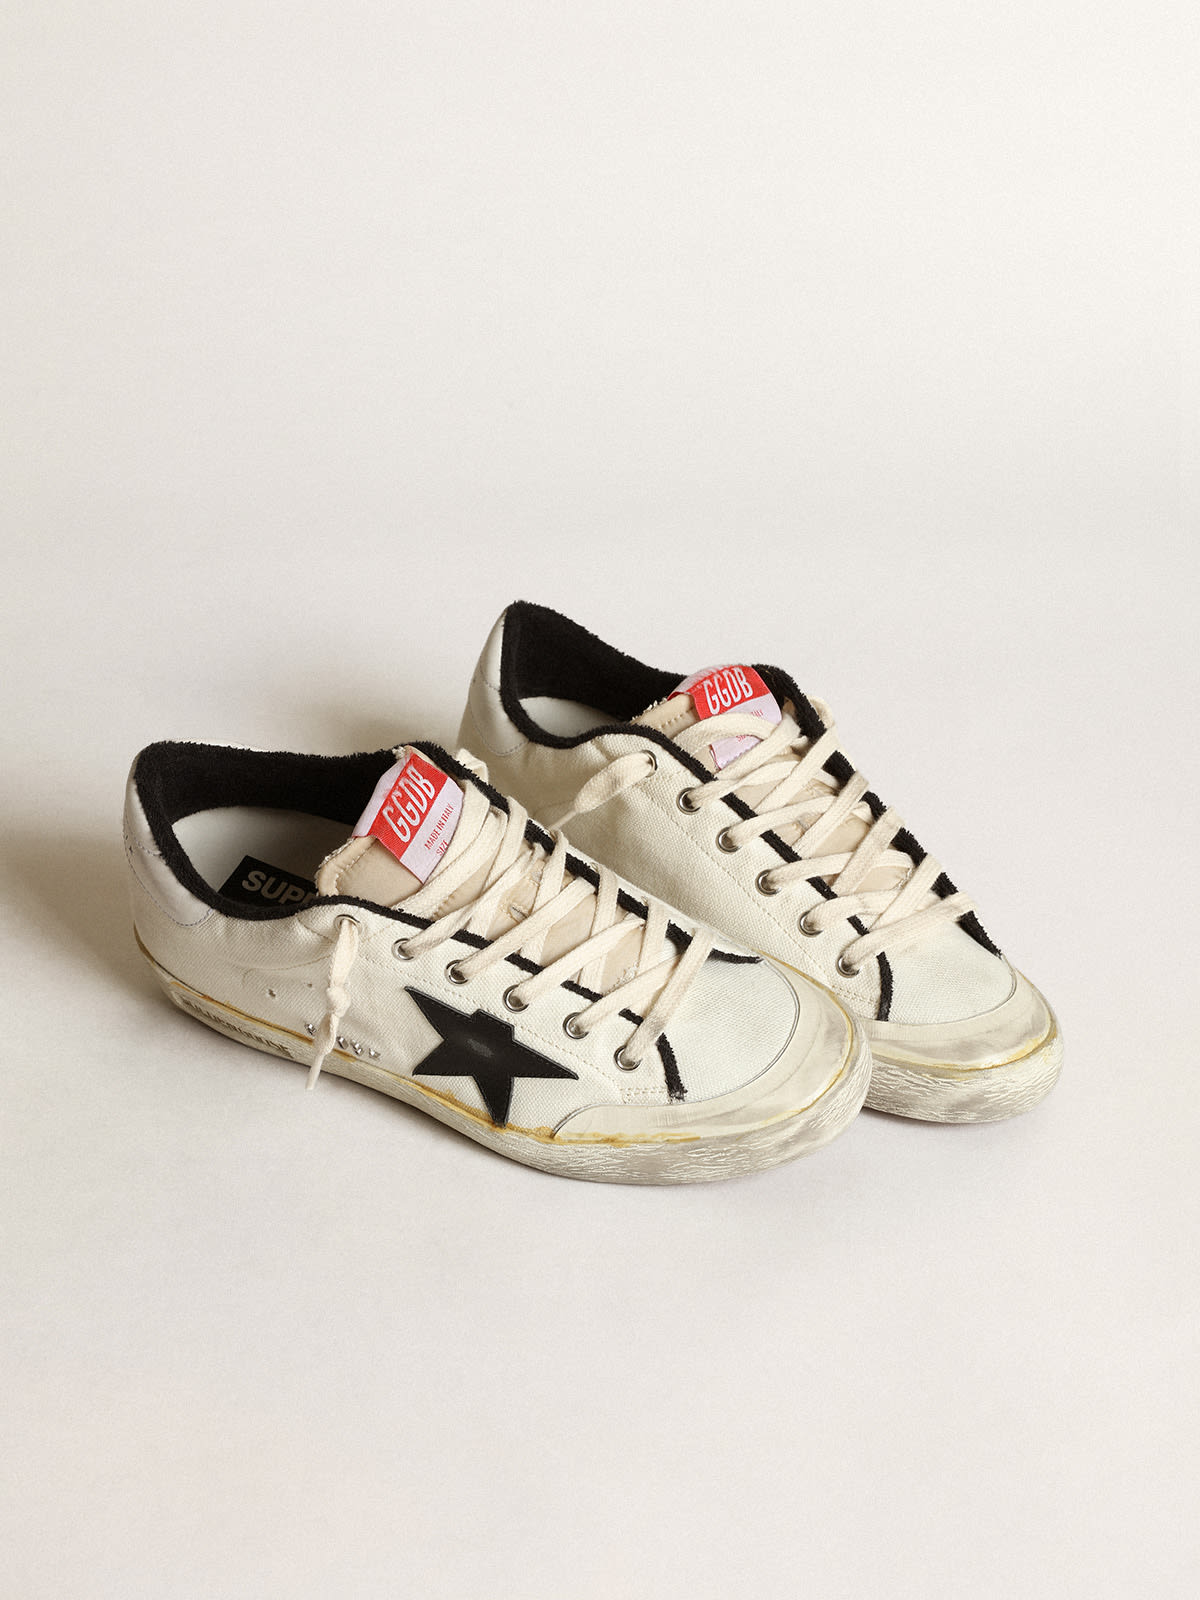 Golden Goose - Women’s Super-Star LTD sneakers in beige canvas with black leather star and white leather heel tab in 